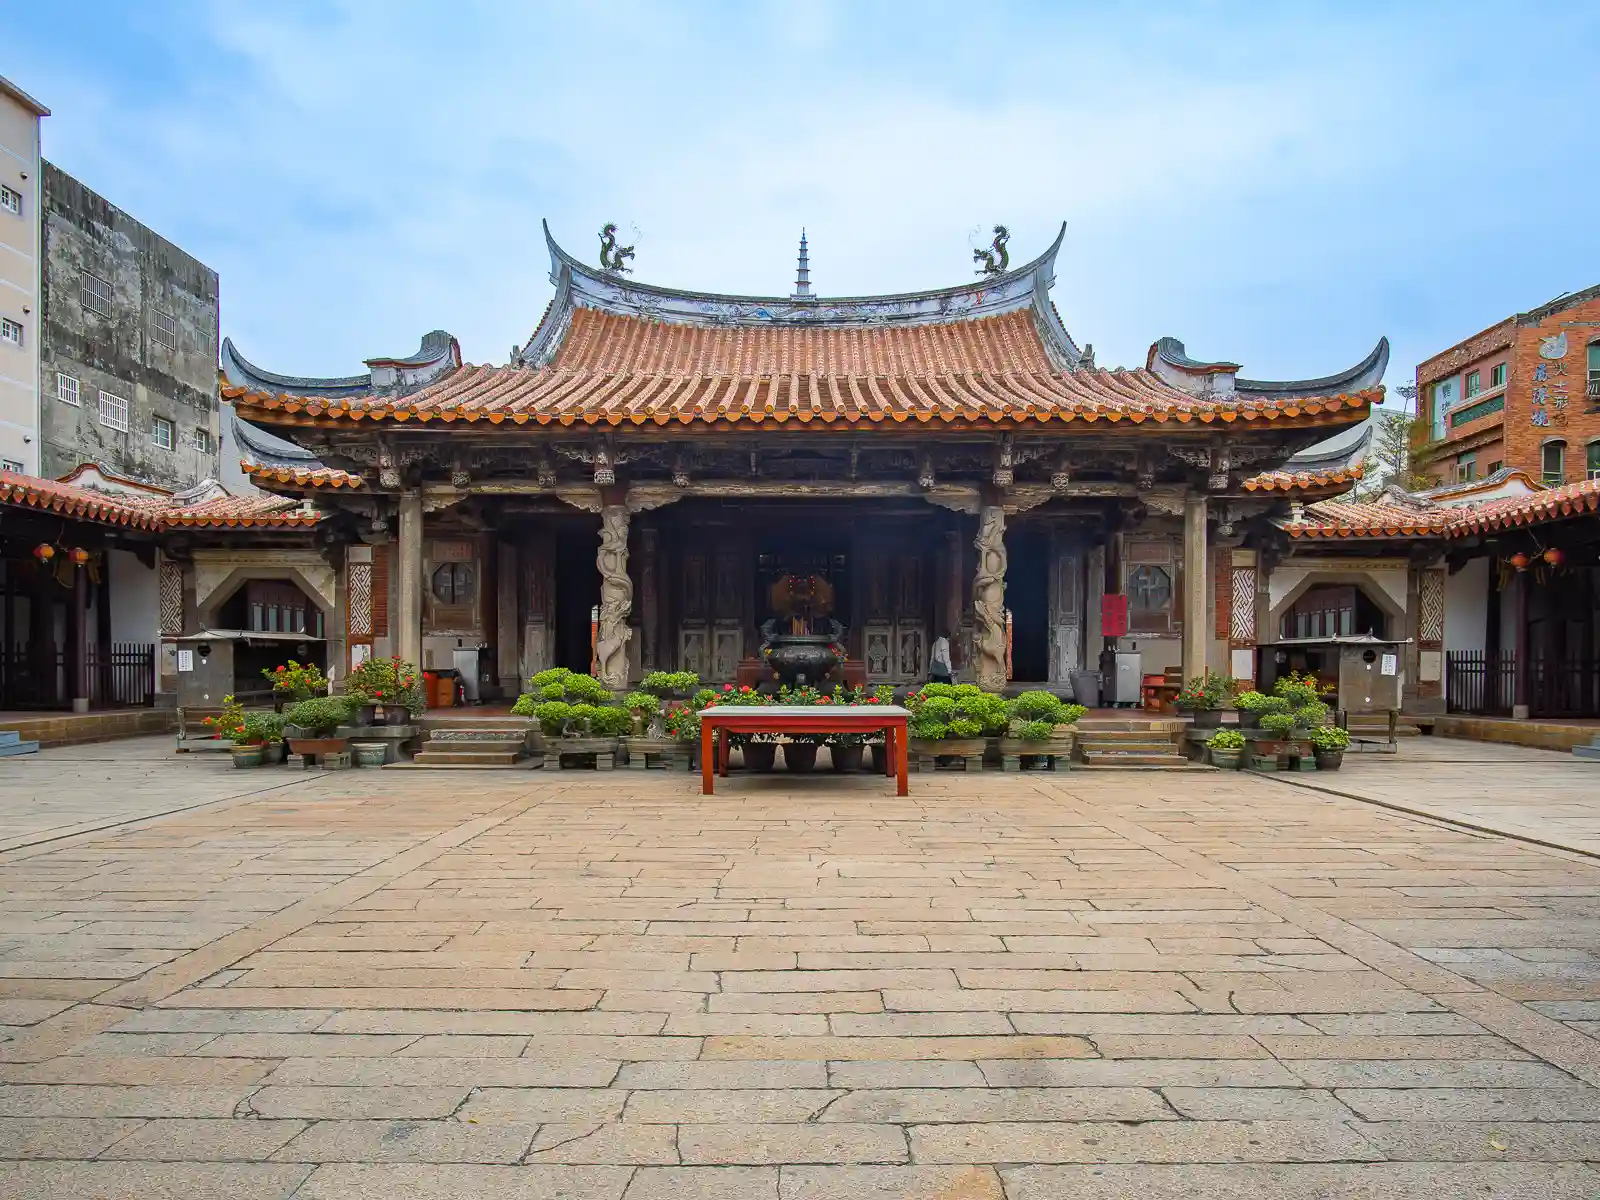 The central courtyard and front facade of the main hall of Lukang Longshan Temple.